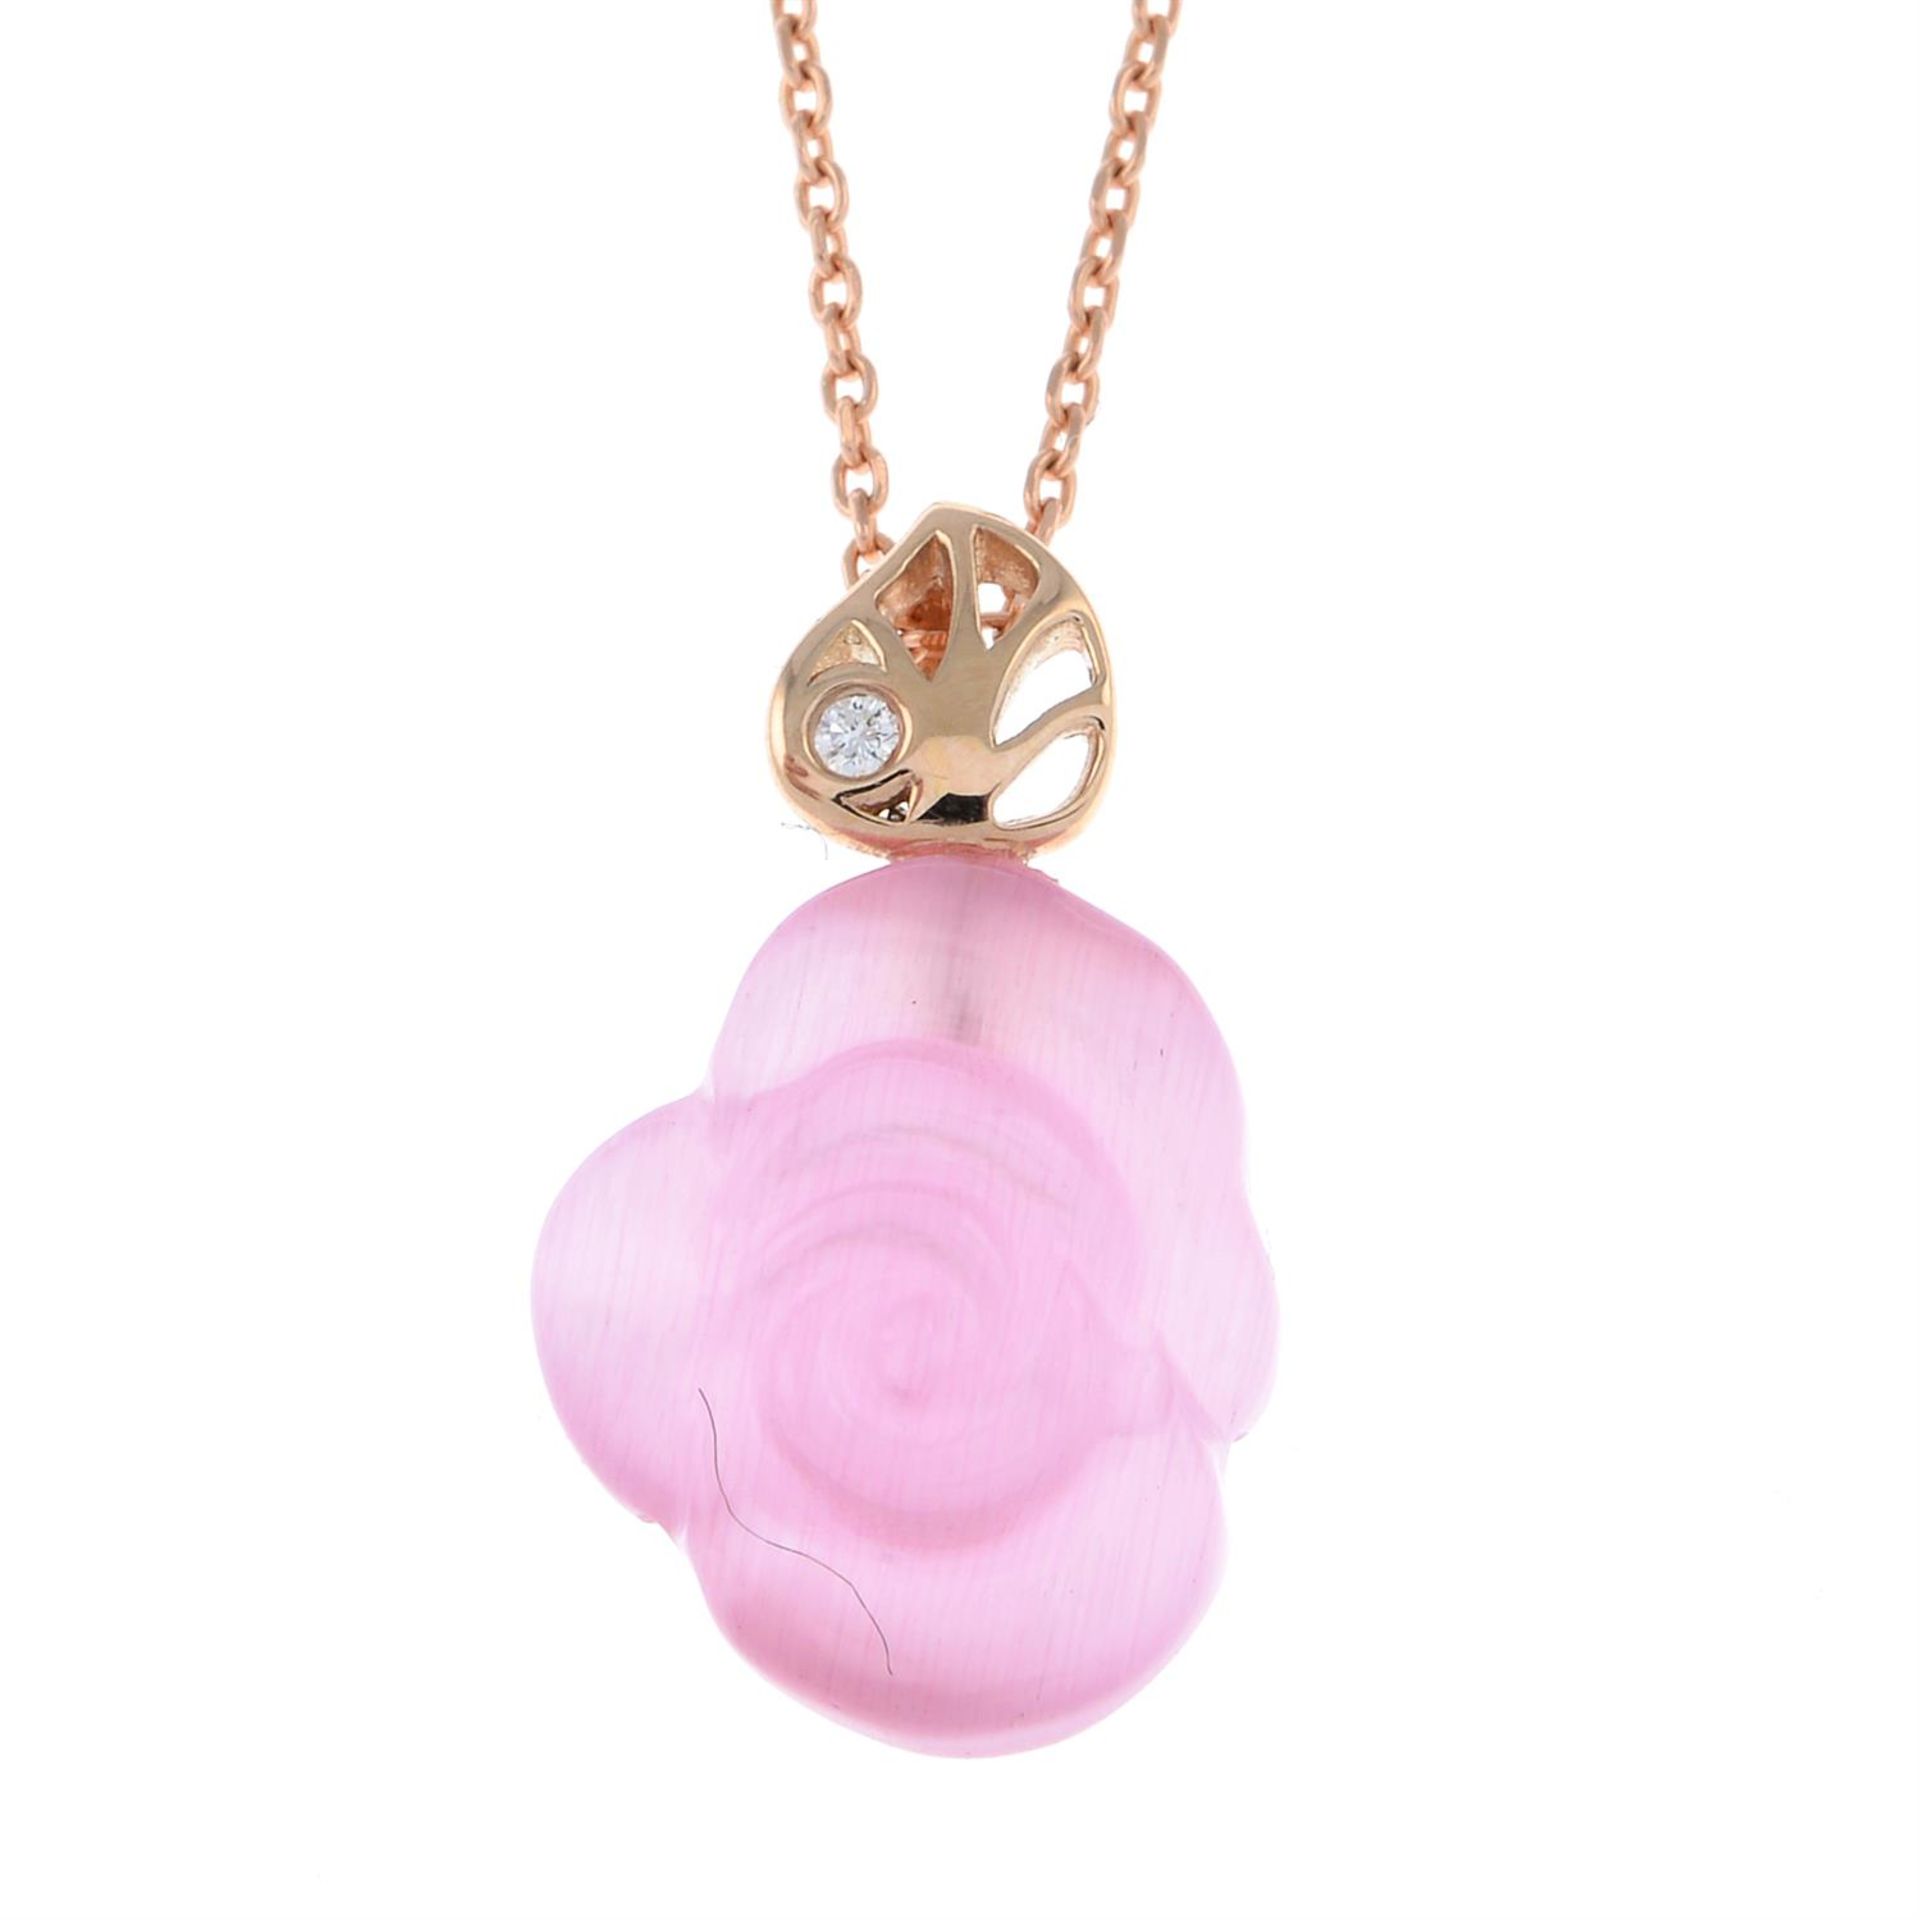 A carved pink paste and diamond rose pendant, with chain.